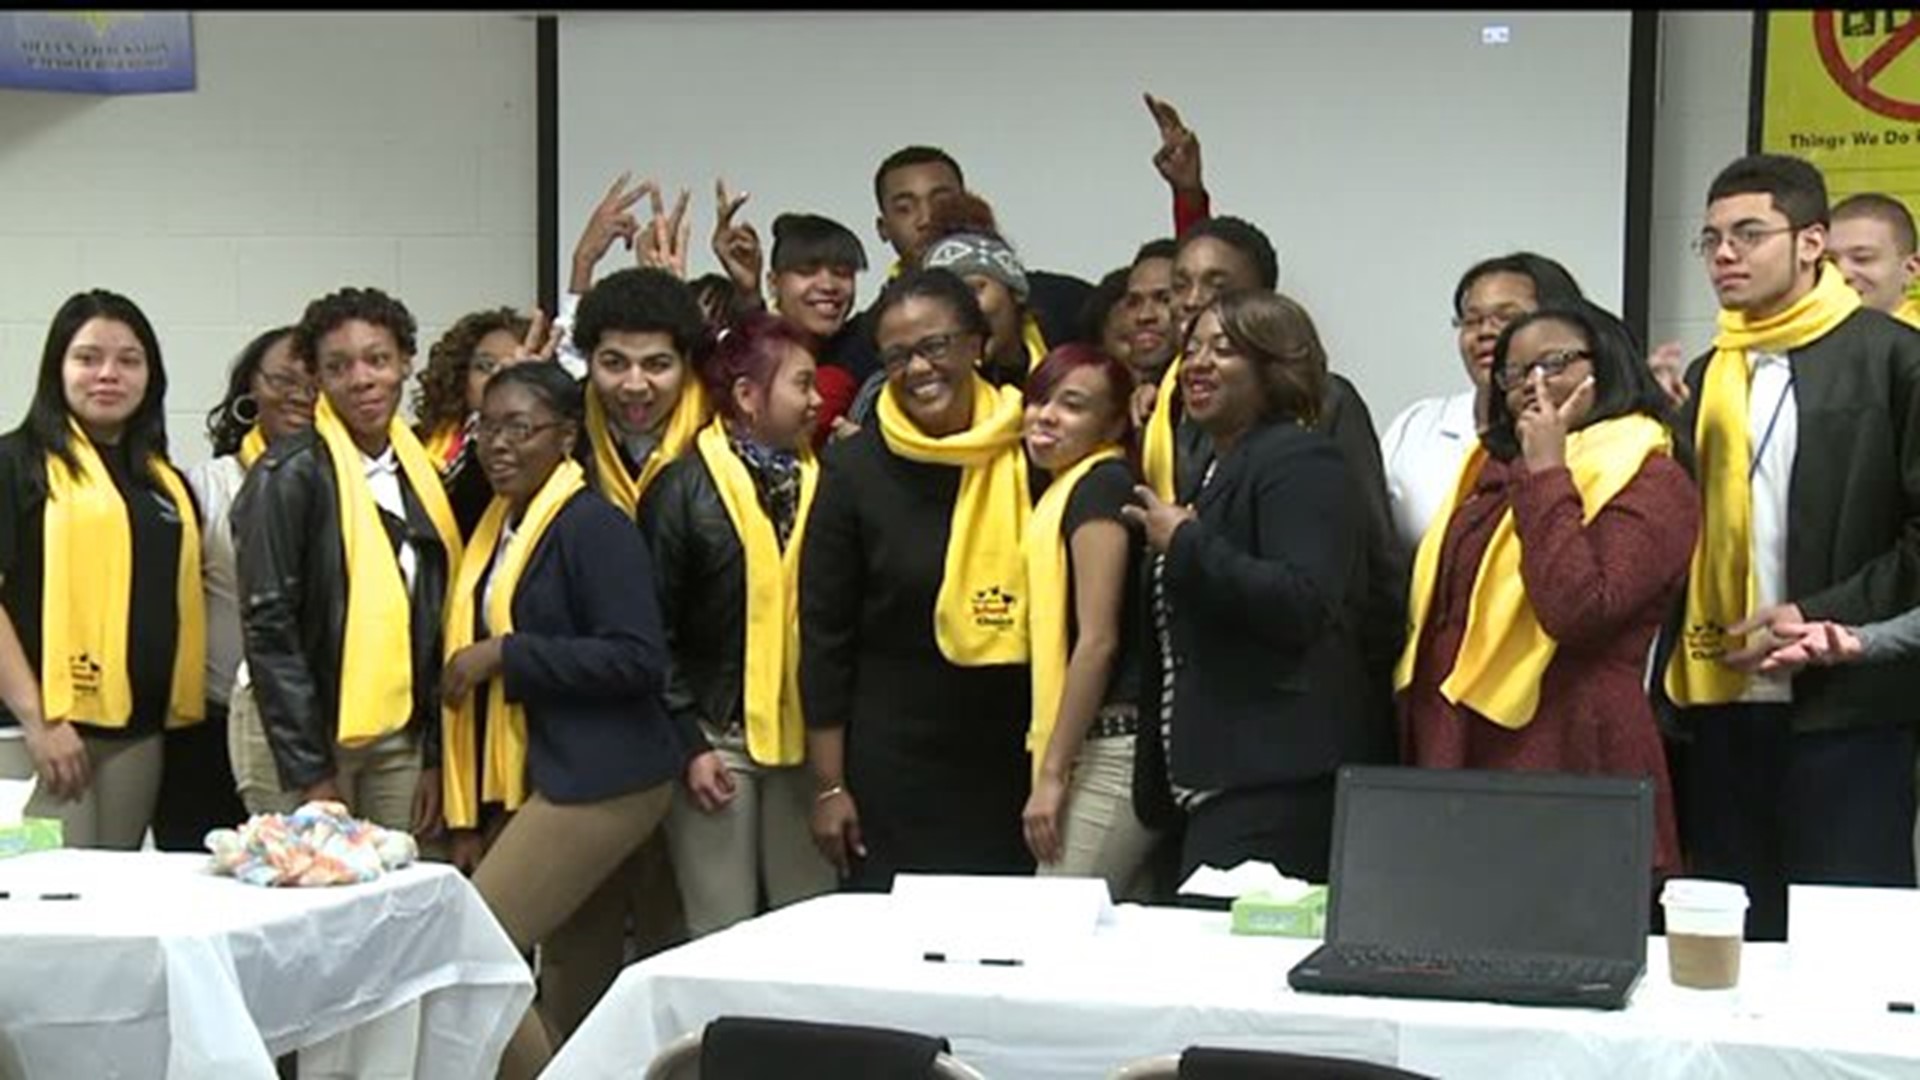 Mayor Kim Bracey holds conference to help end bullying